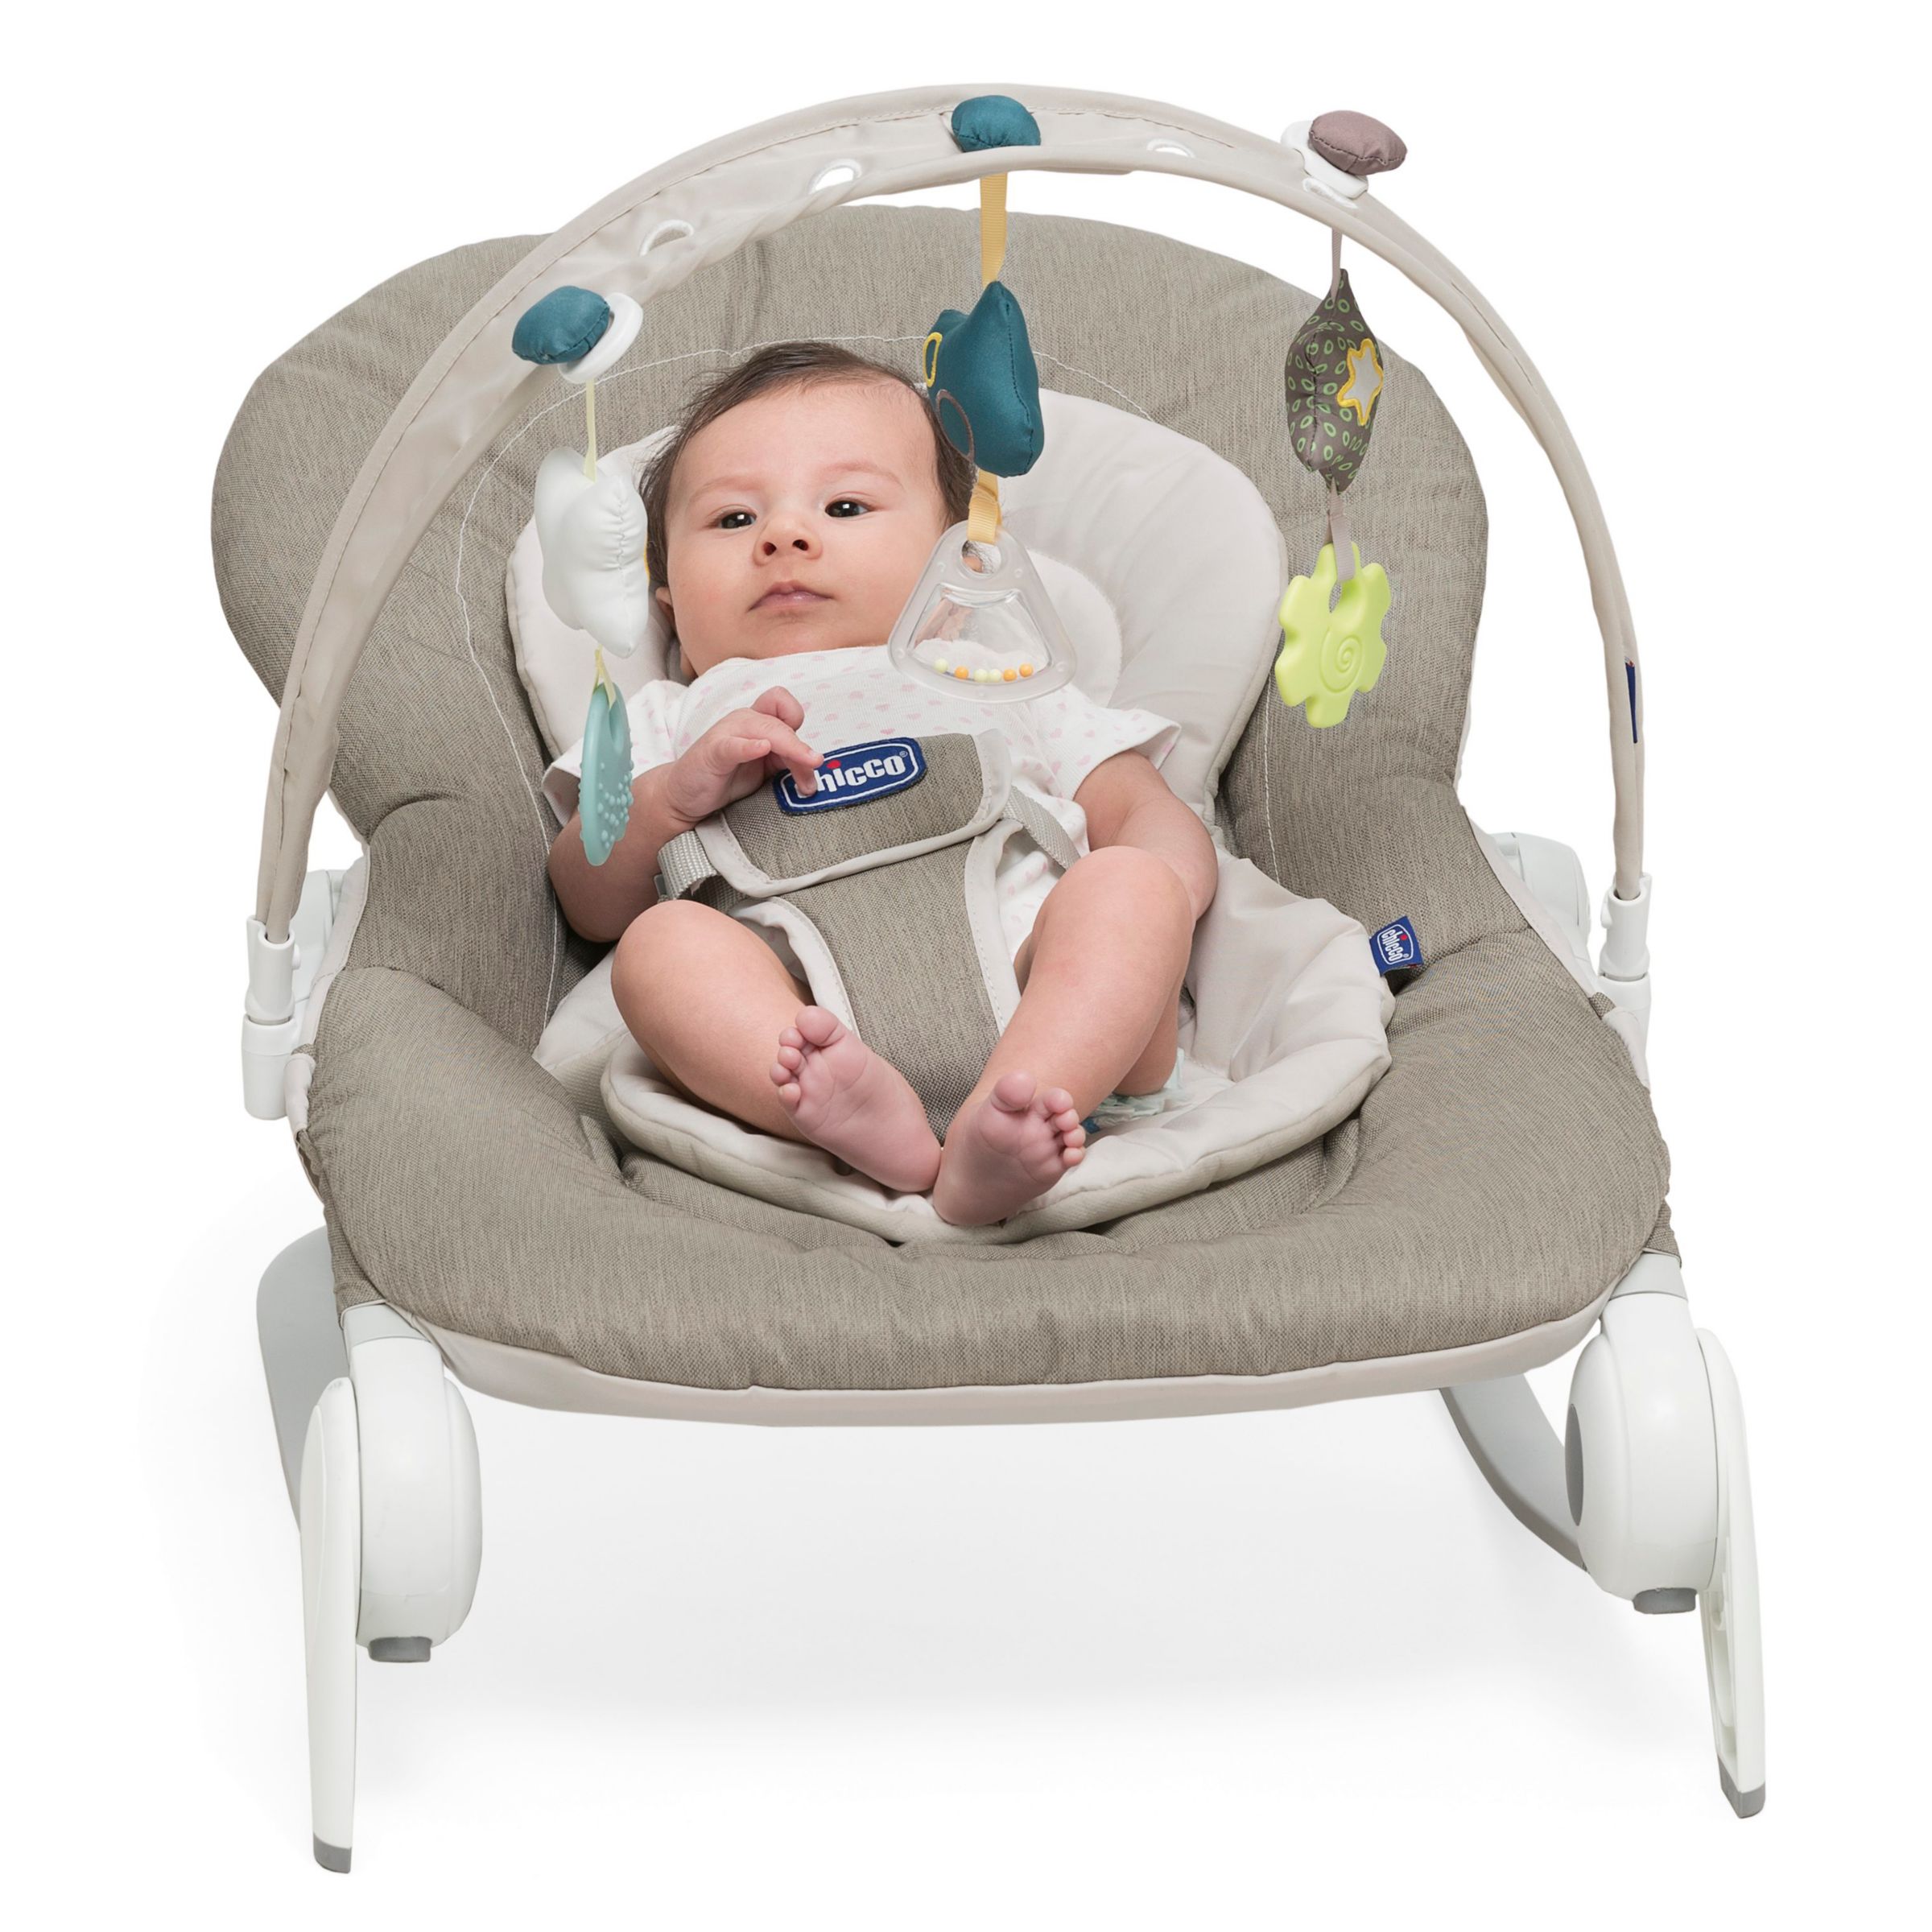 chicco hoopla baby bouncer and rocking chair